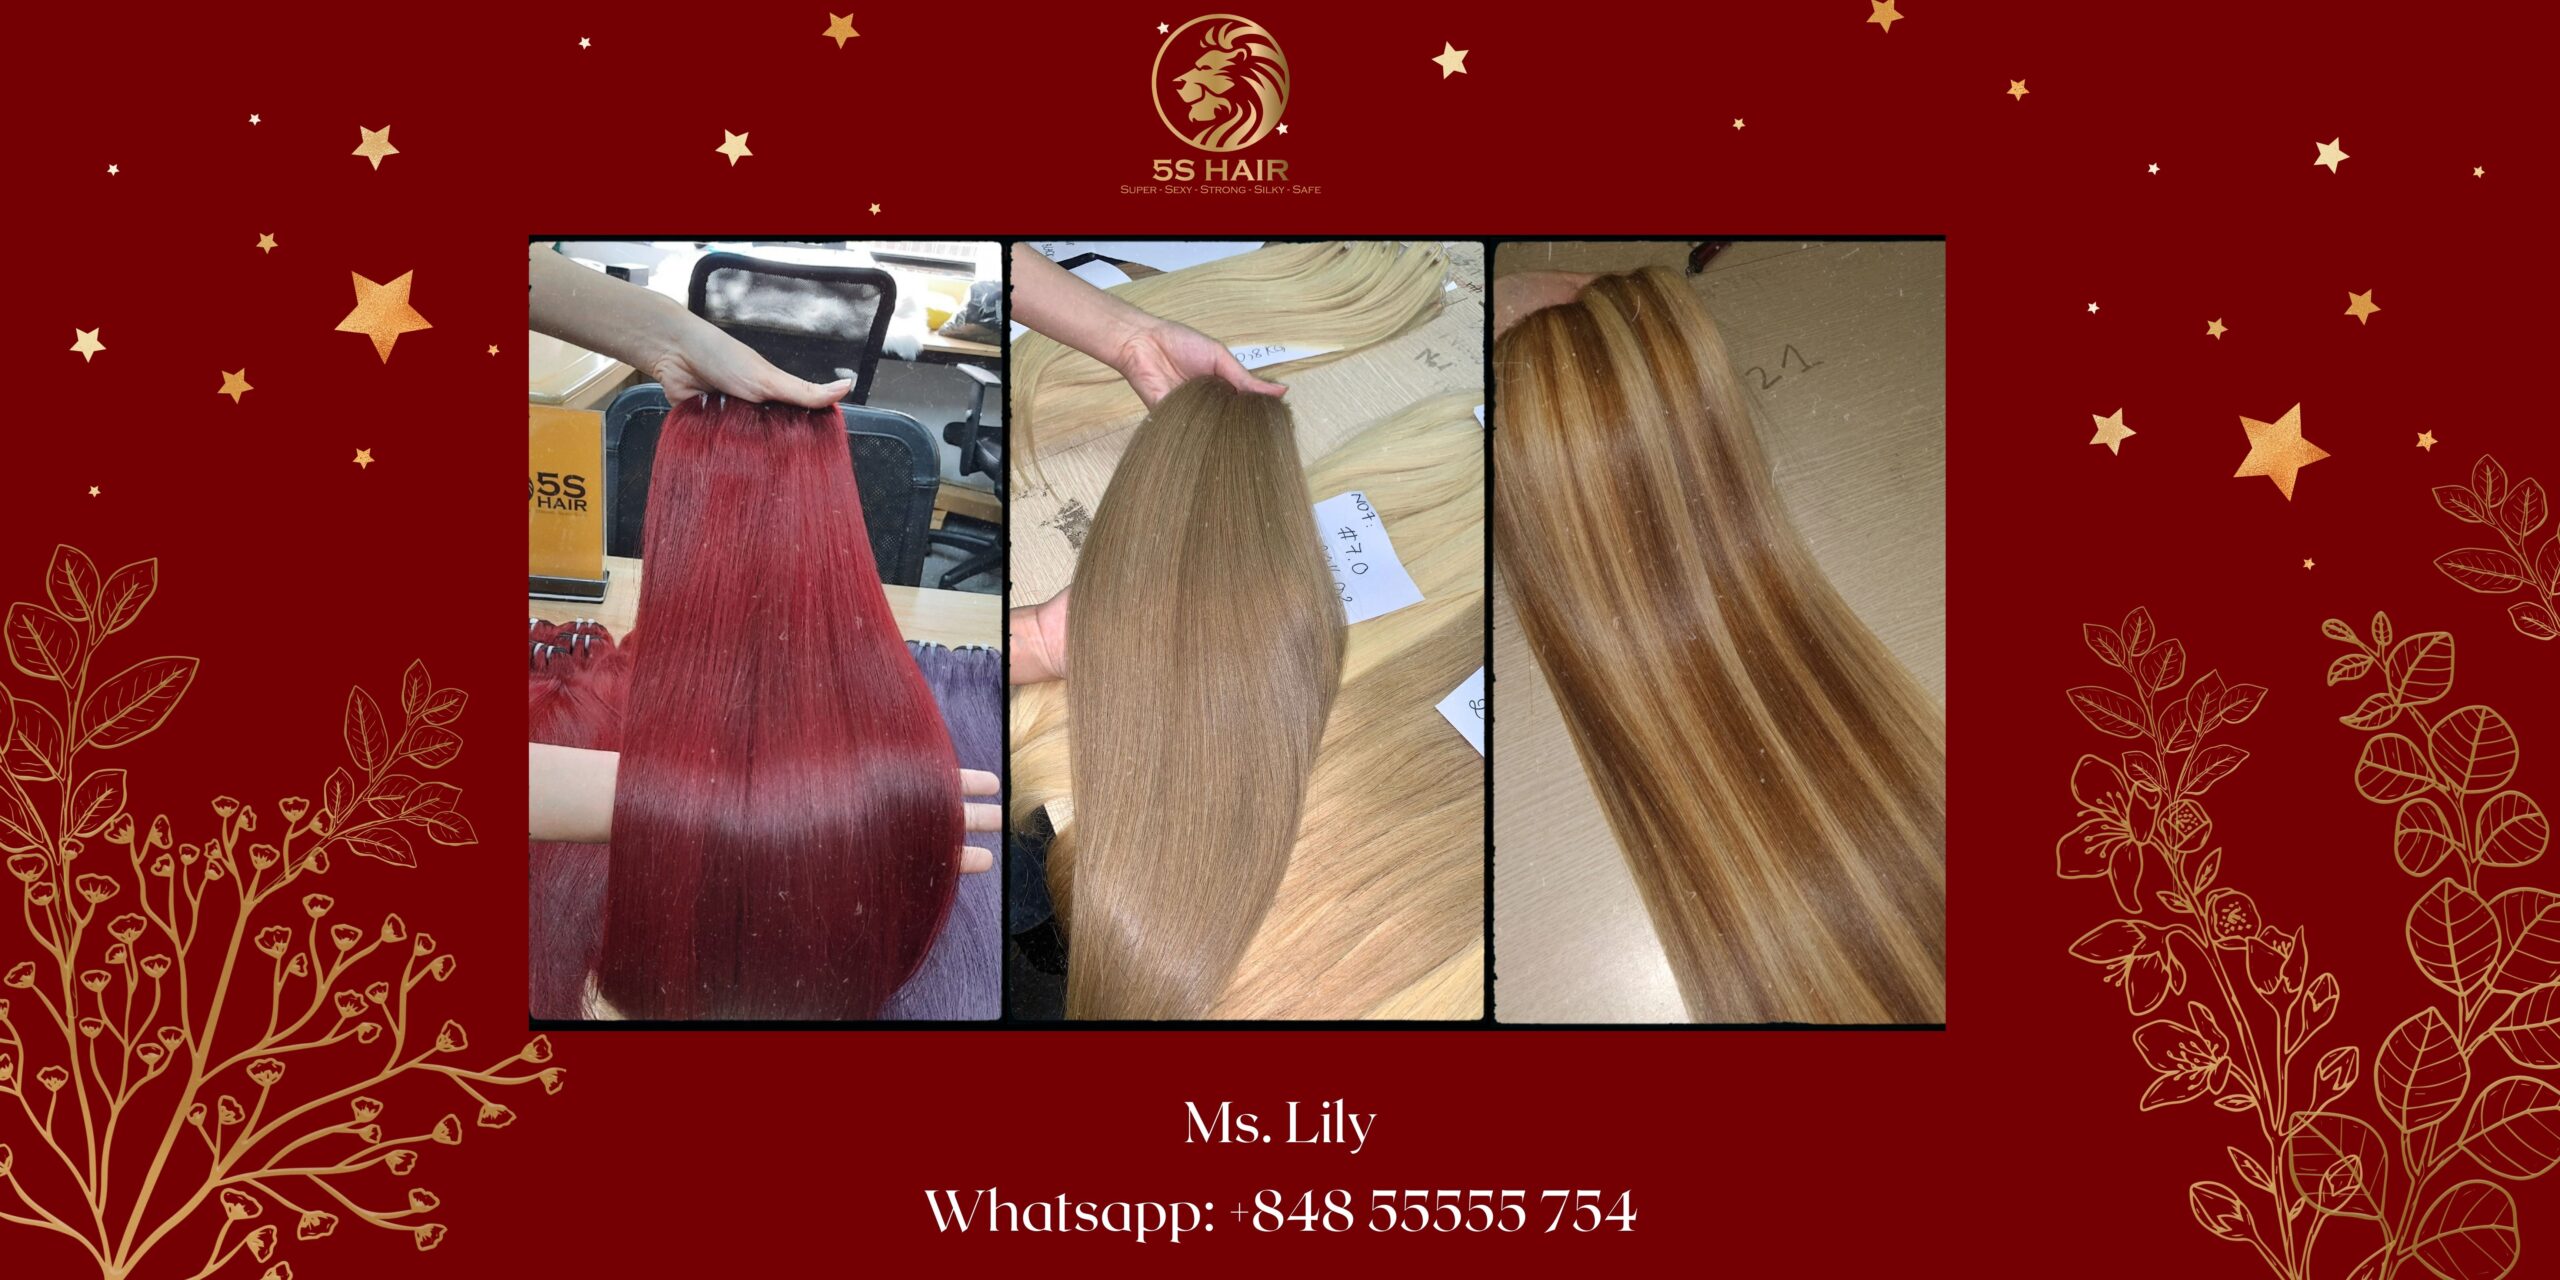 common-5s-hair-factorys-problems-hair-extensions-market-1